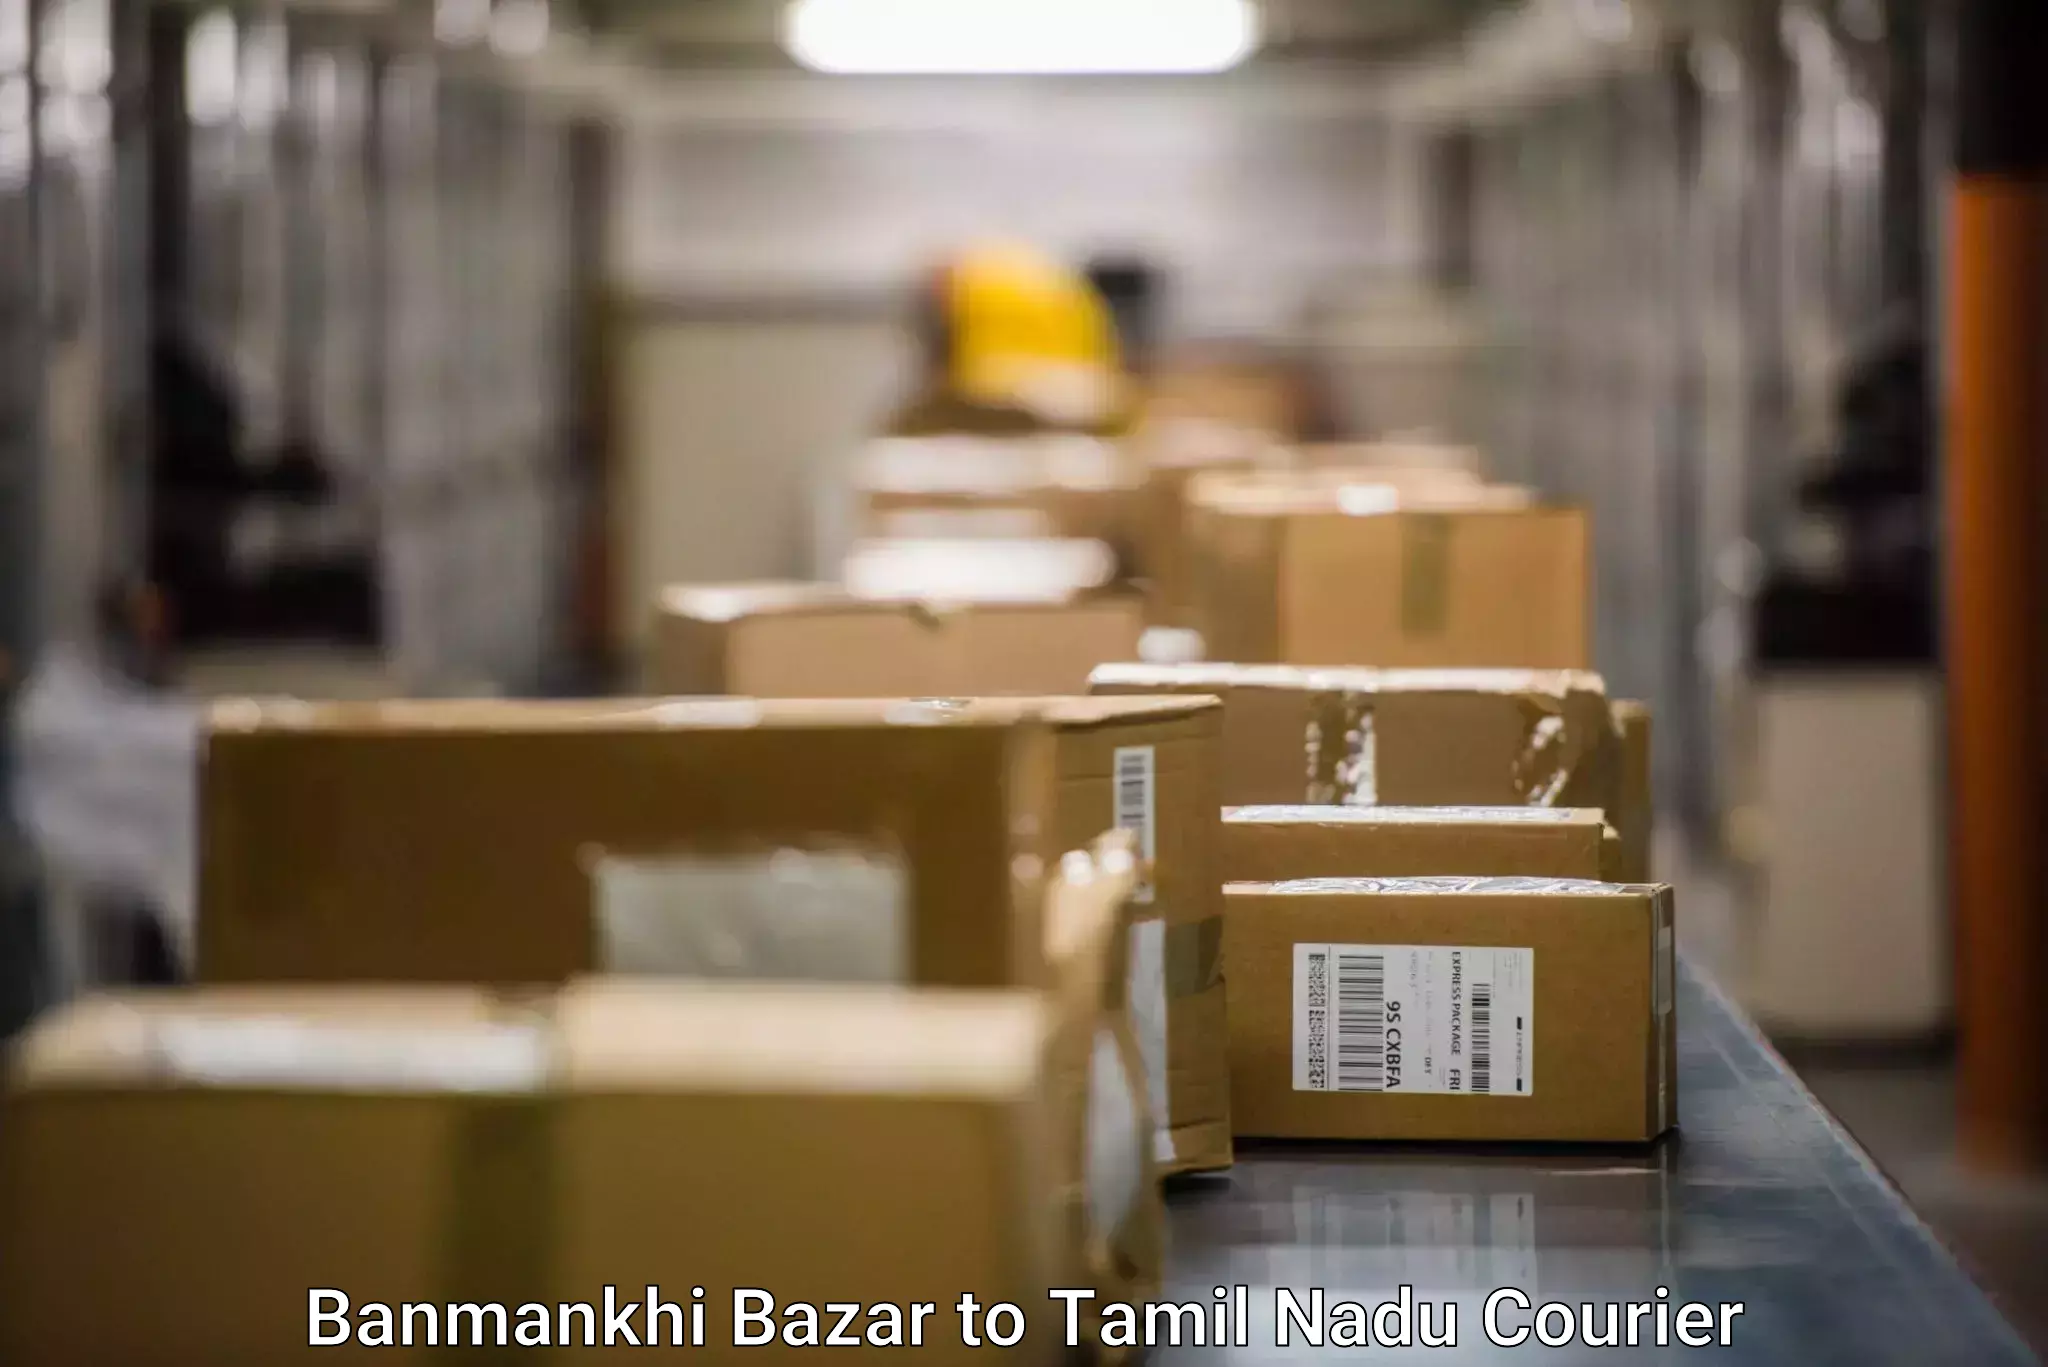 State-of-the-art courier technology Banmankhi Bazar to Tamil Nadu